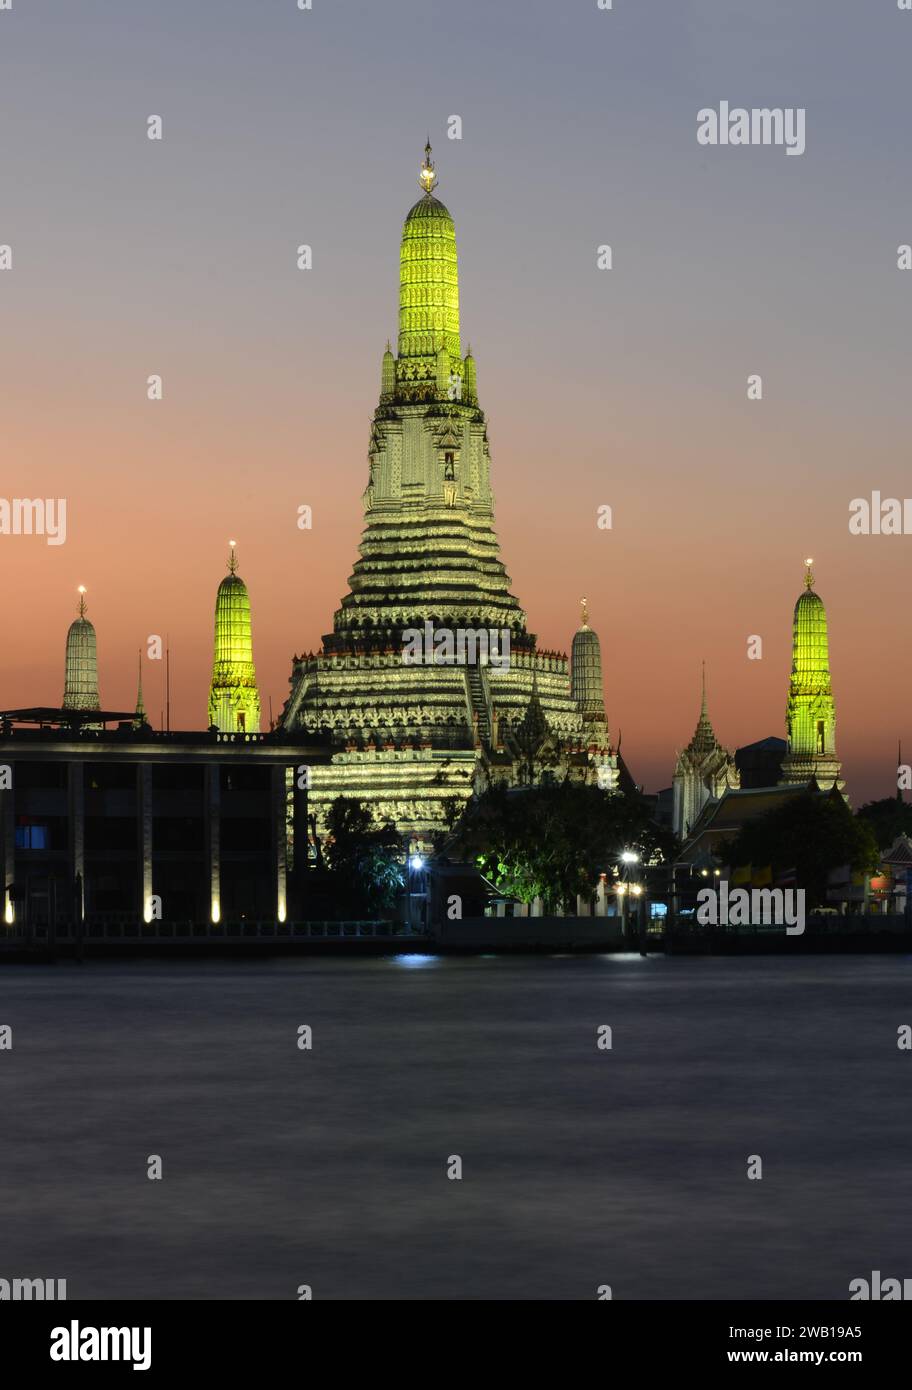 Wat Arun (Temple of Dawn) on the banks of the Chao Phraya River in Bangkok, Thailand. Stock Photo